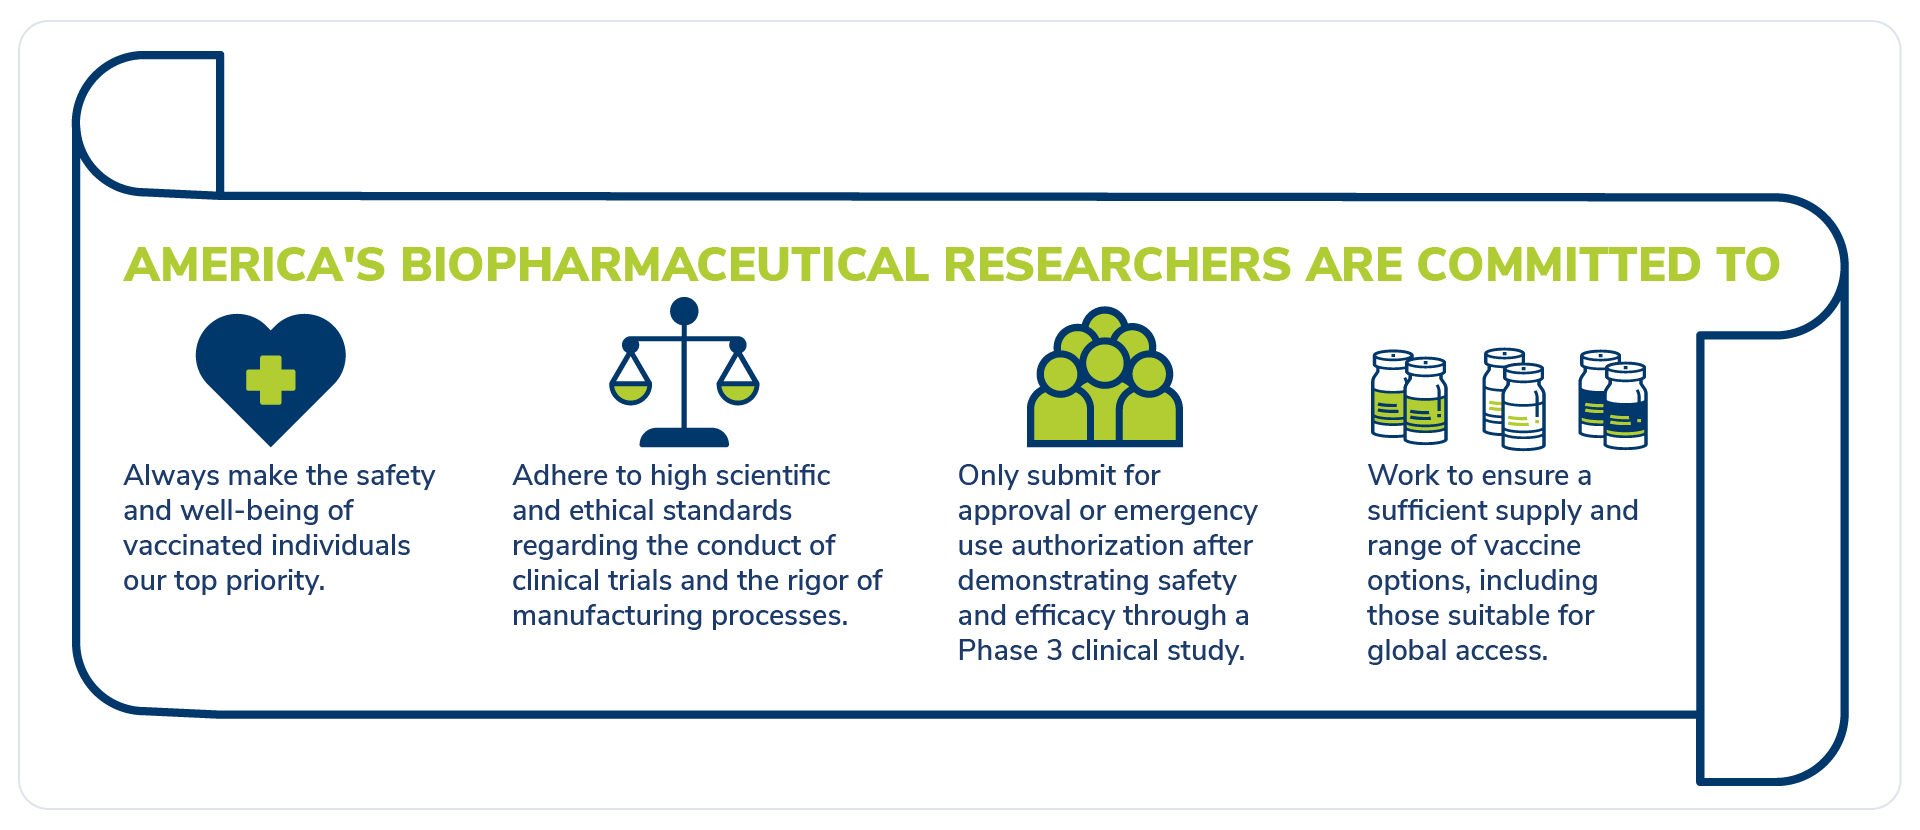 America’s biopharmaceutical research companies are committed to safety and science